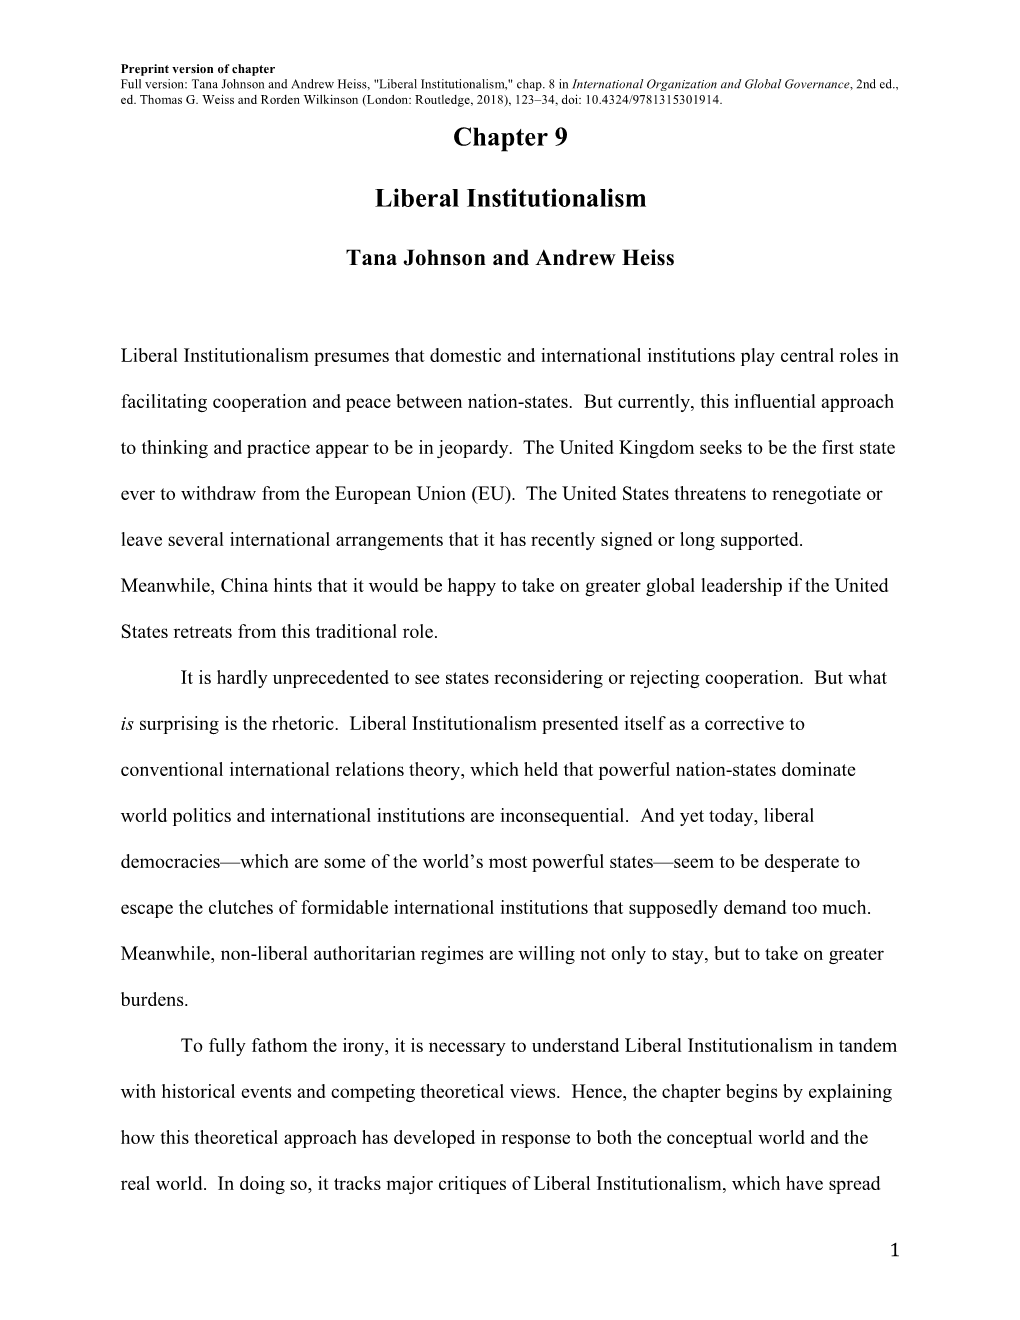 Chapter 9 Liberal Institutionalism